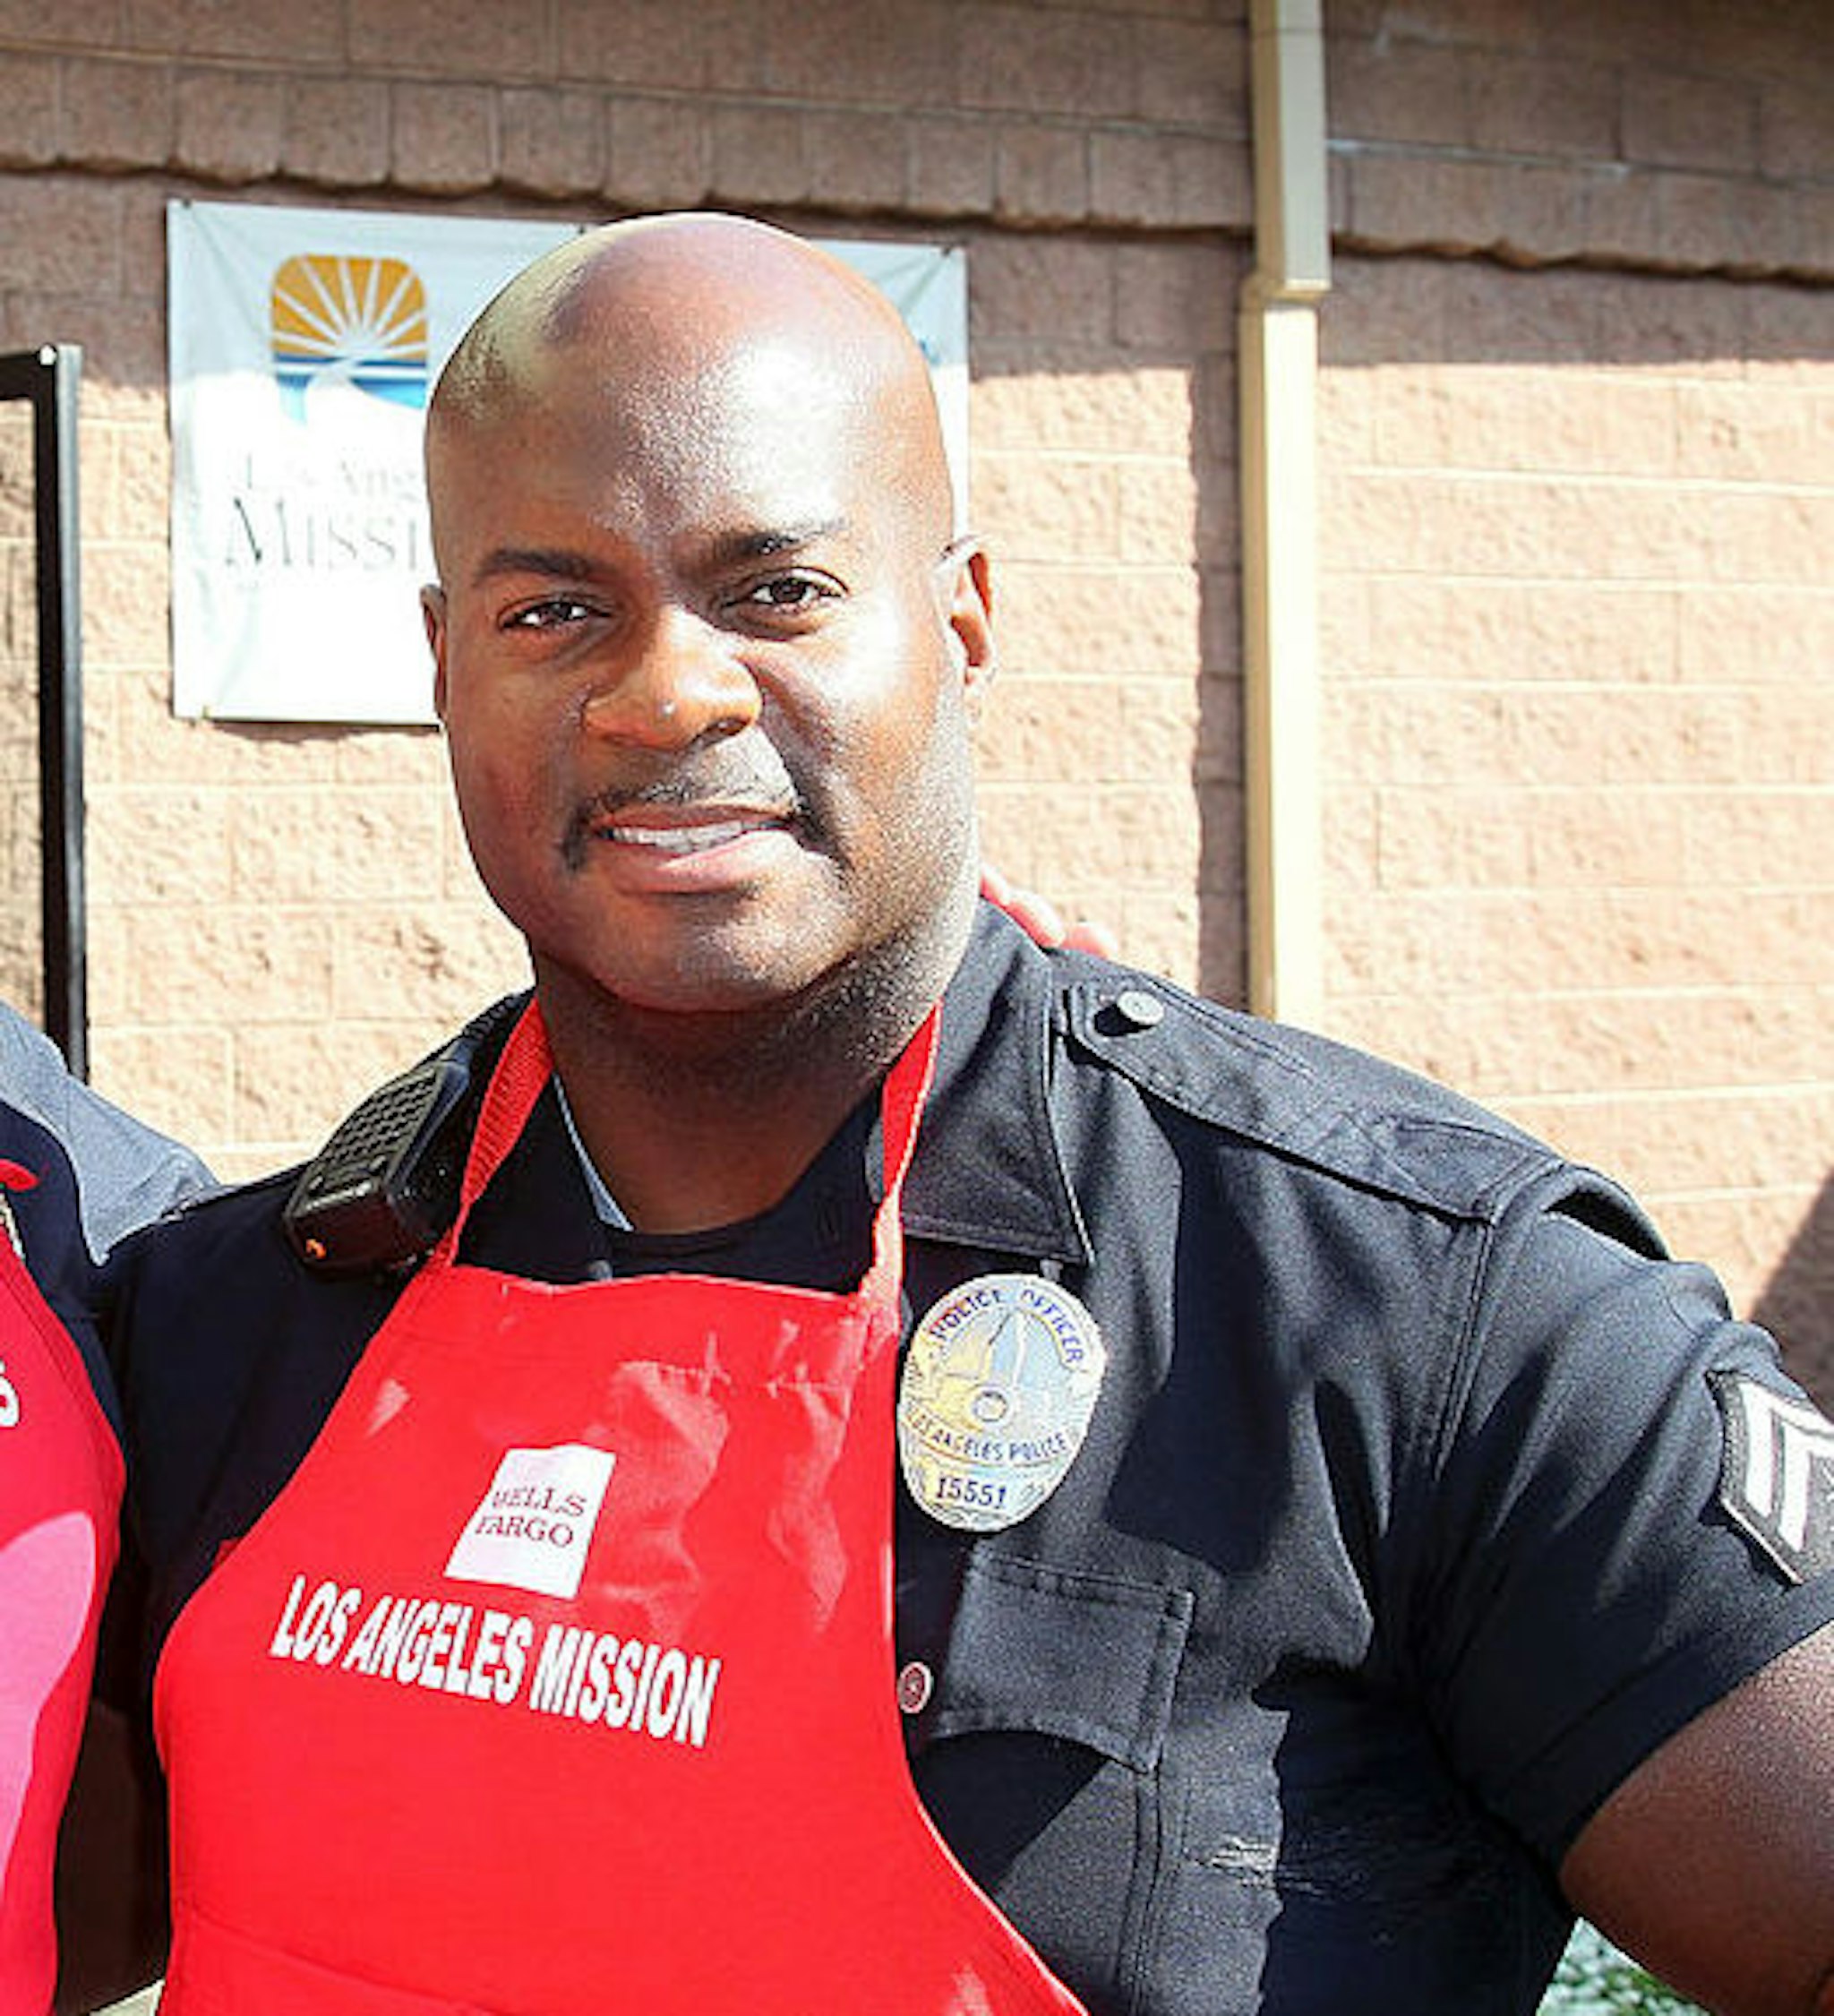 The Los Angeles Mission's Thanksgiving For Skid Row Homeless